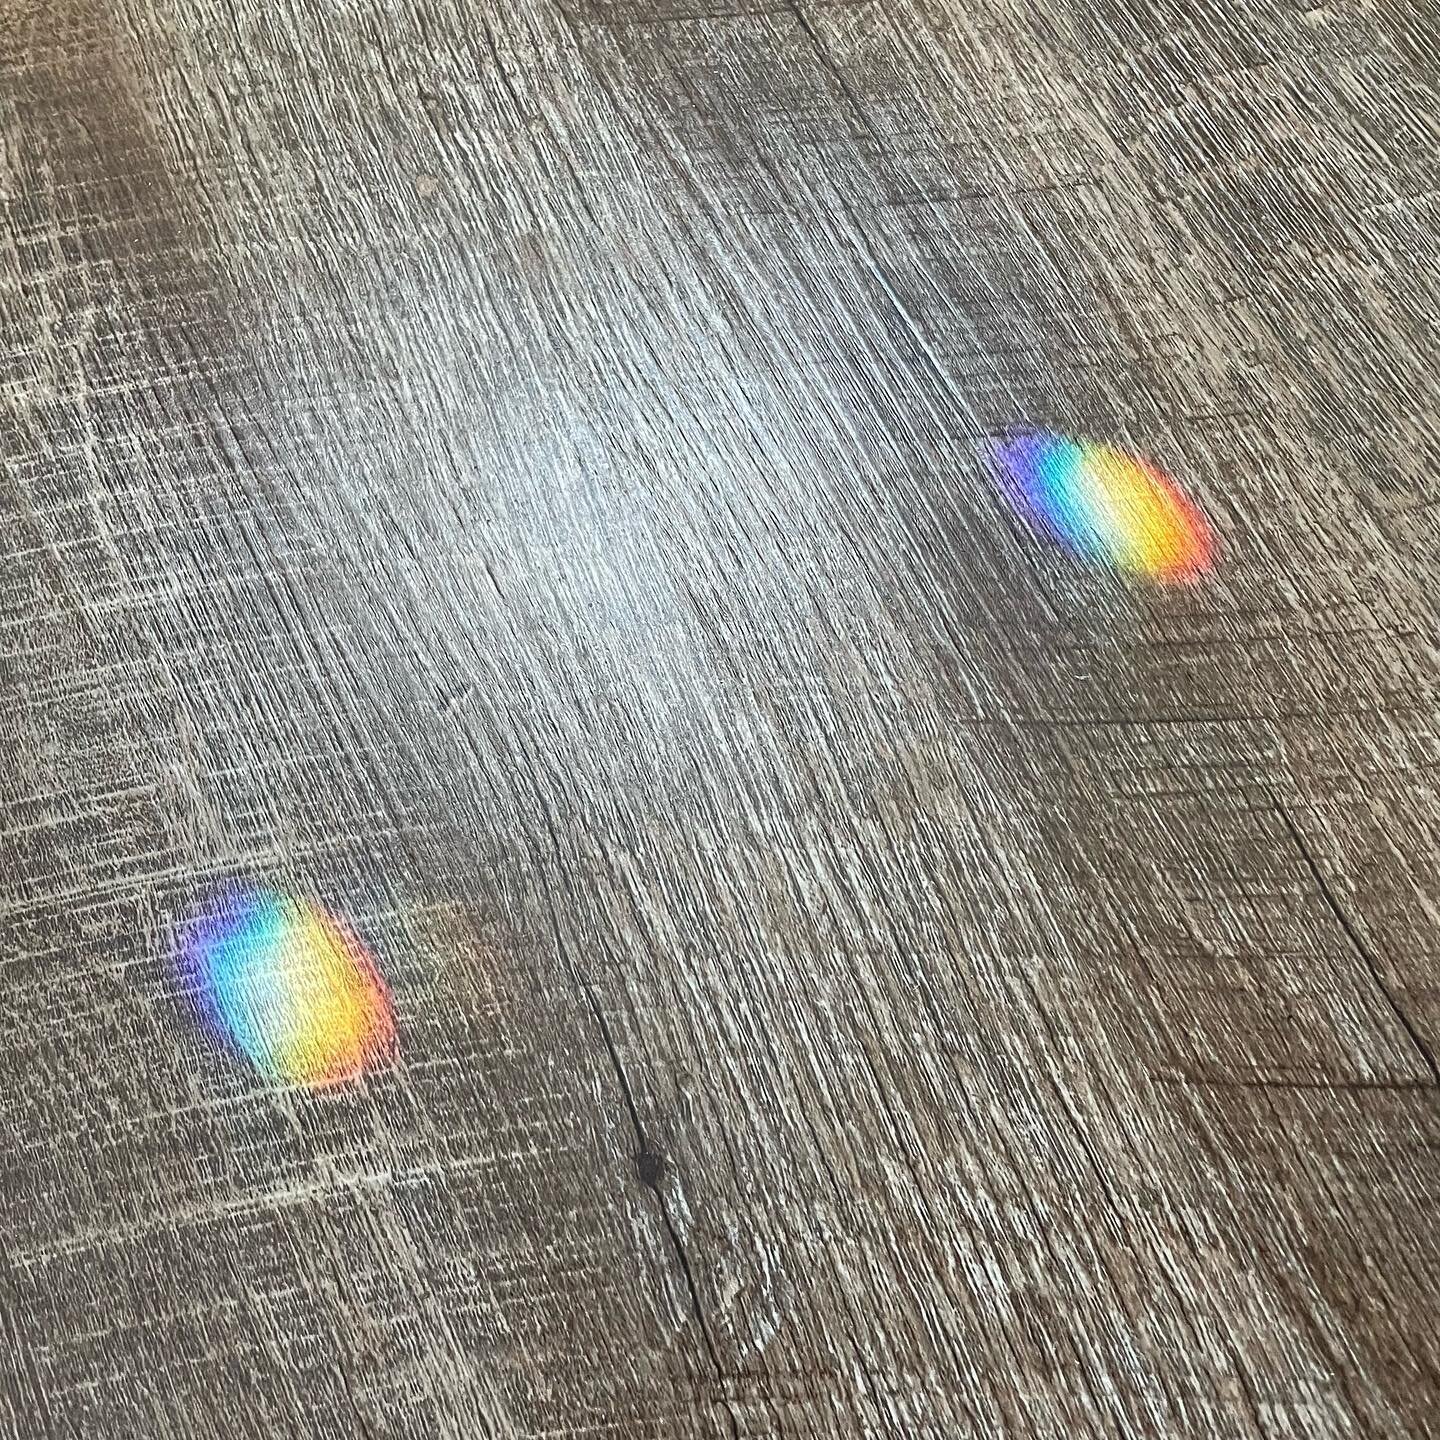 Finding joy in the little things, including the rainbows reflected through the glass in the new front door. 🌈🤍 #rainbows 

(Image: two small, circular rainbows on wood flooring.)